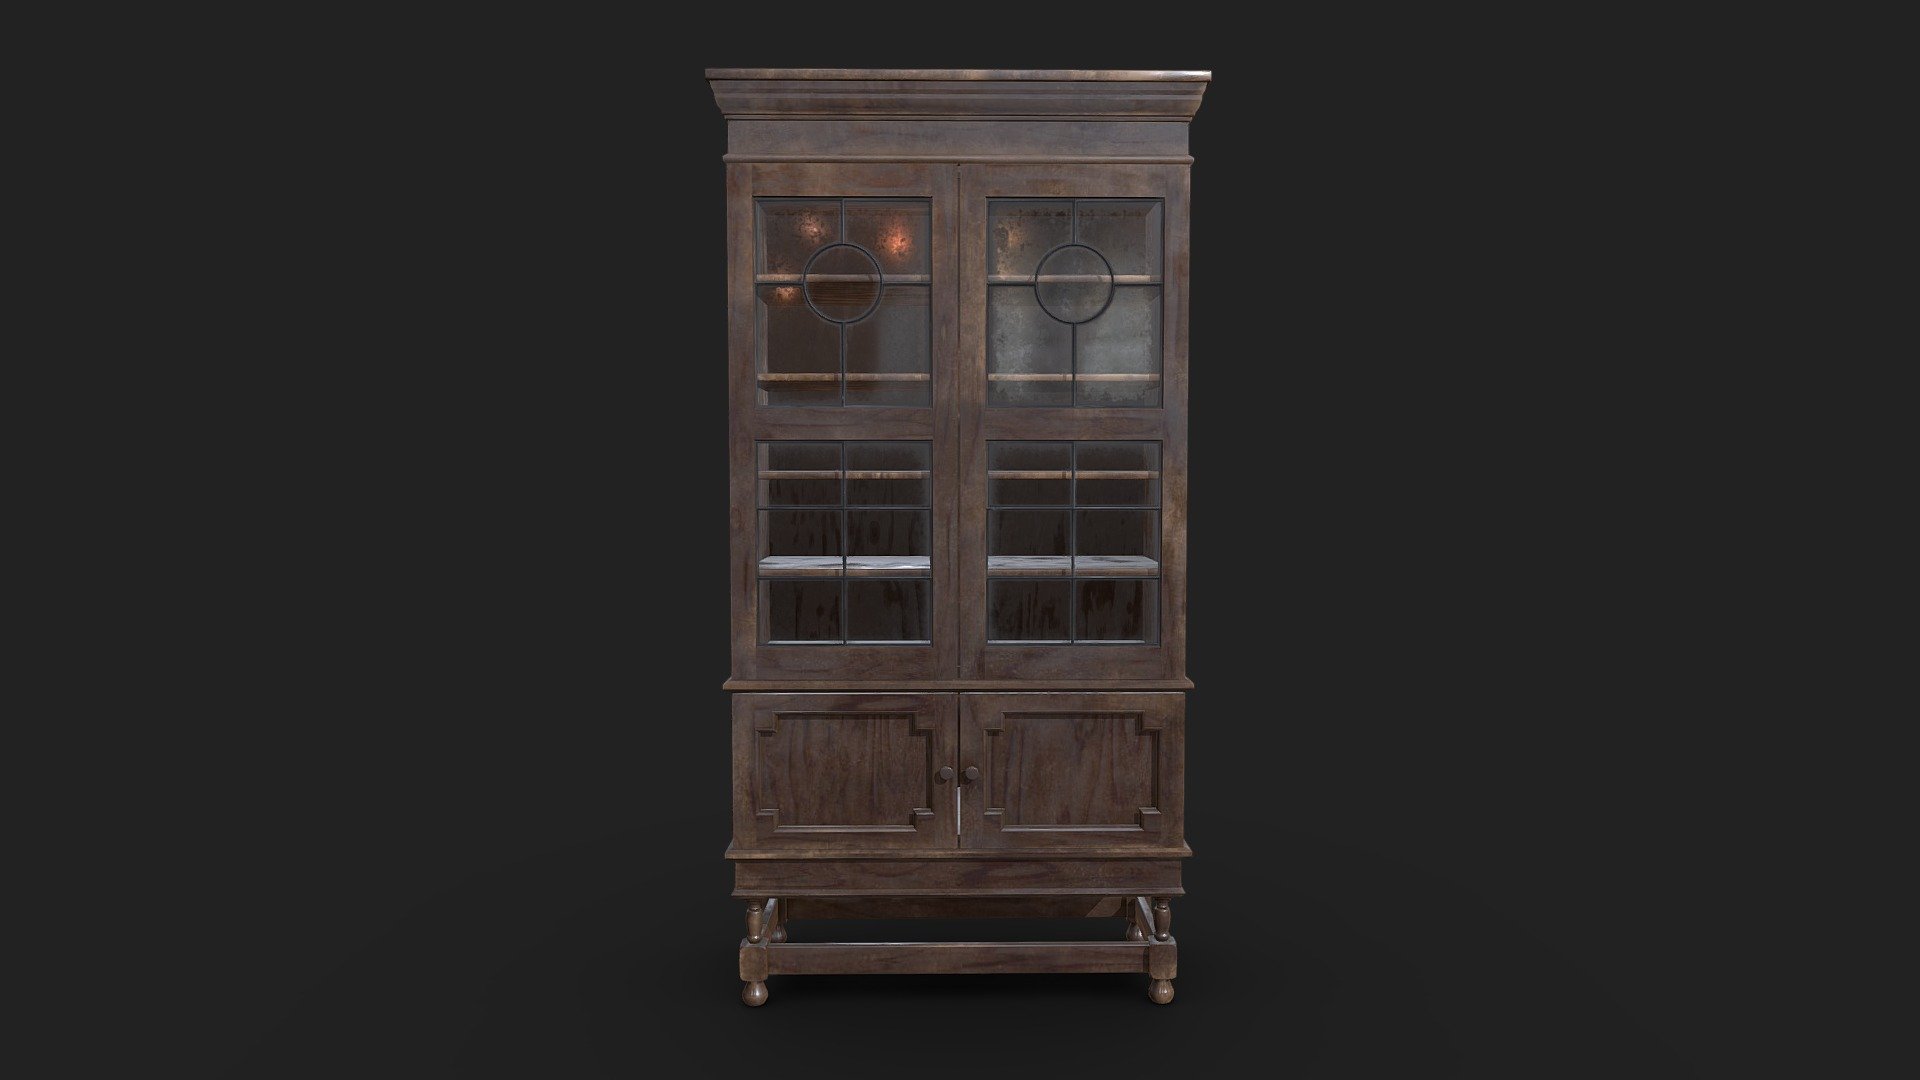 All the doors are separated and openable.

2048x2048 textures packs (PBR Metal Rough, Unity HDRP, Unity Standard Metallic and UE4):

PBR Metal Rough- BaseColor, AO, Height, Normal, Roughness and Metallic;

Unity HDRP: BaseColor, MaskMap, Normal;

Unity Standard Metallic: AlbedoTransparency, MetallicSmoothness, Normal;

Unreal Engine 4: BaseColor, Normal, OcclusionRoughnessMetallic;

The package also has the .fbx, .obj, .stl, .dae and .blend file 3d model